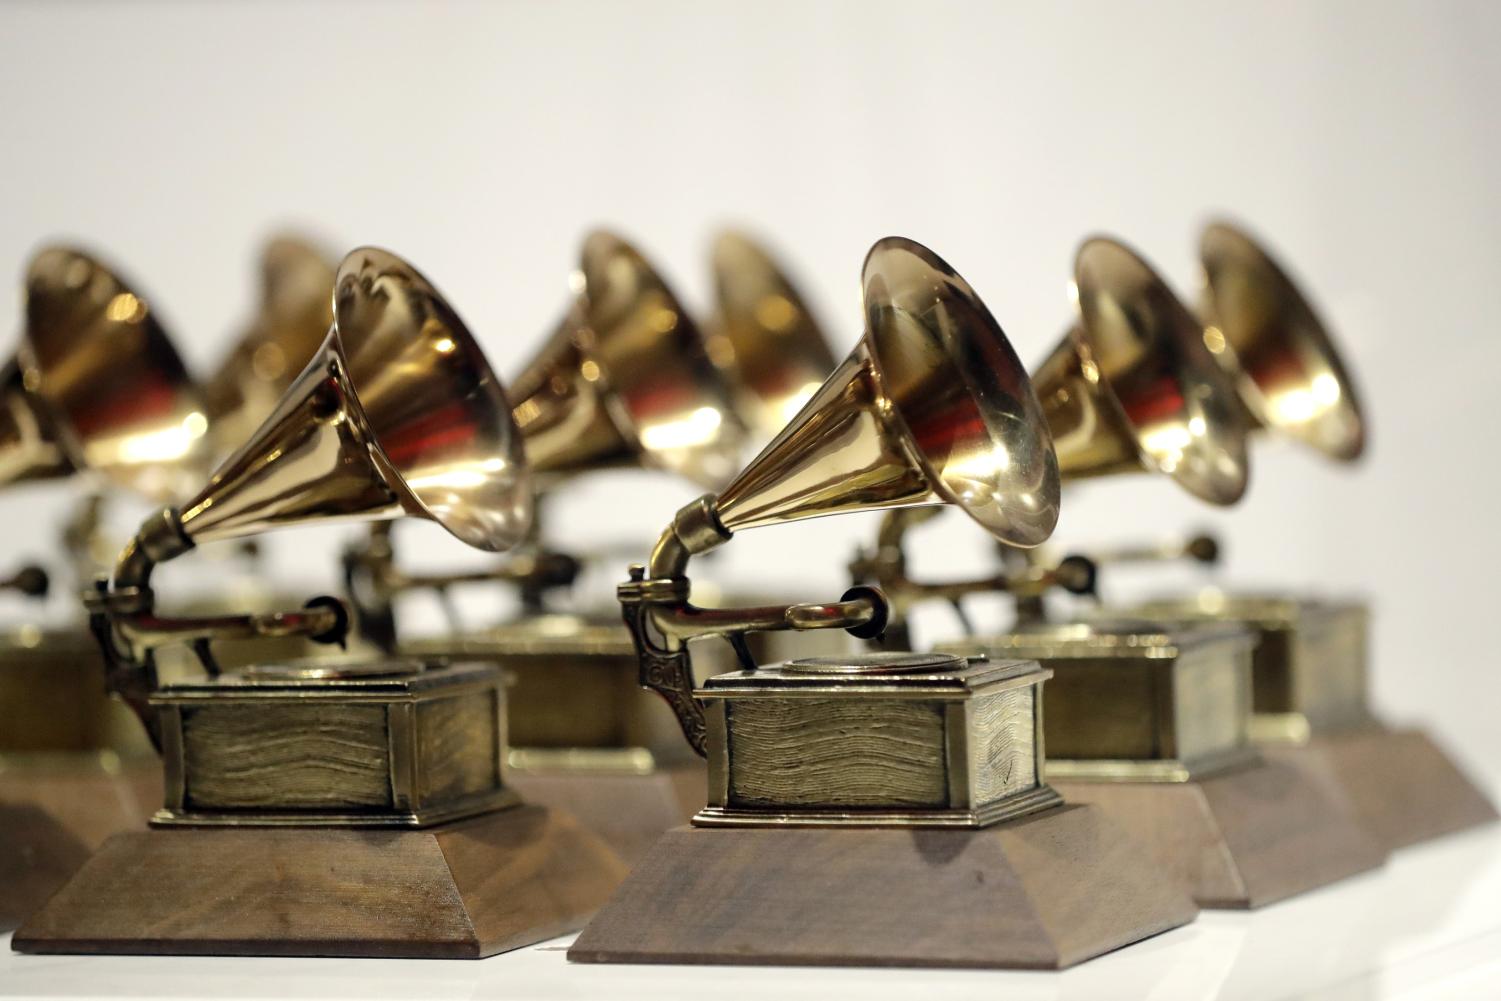 Grammys 2023: Predictions, Who Will Win and Should Win?